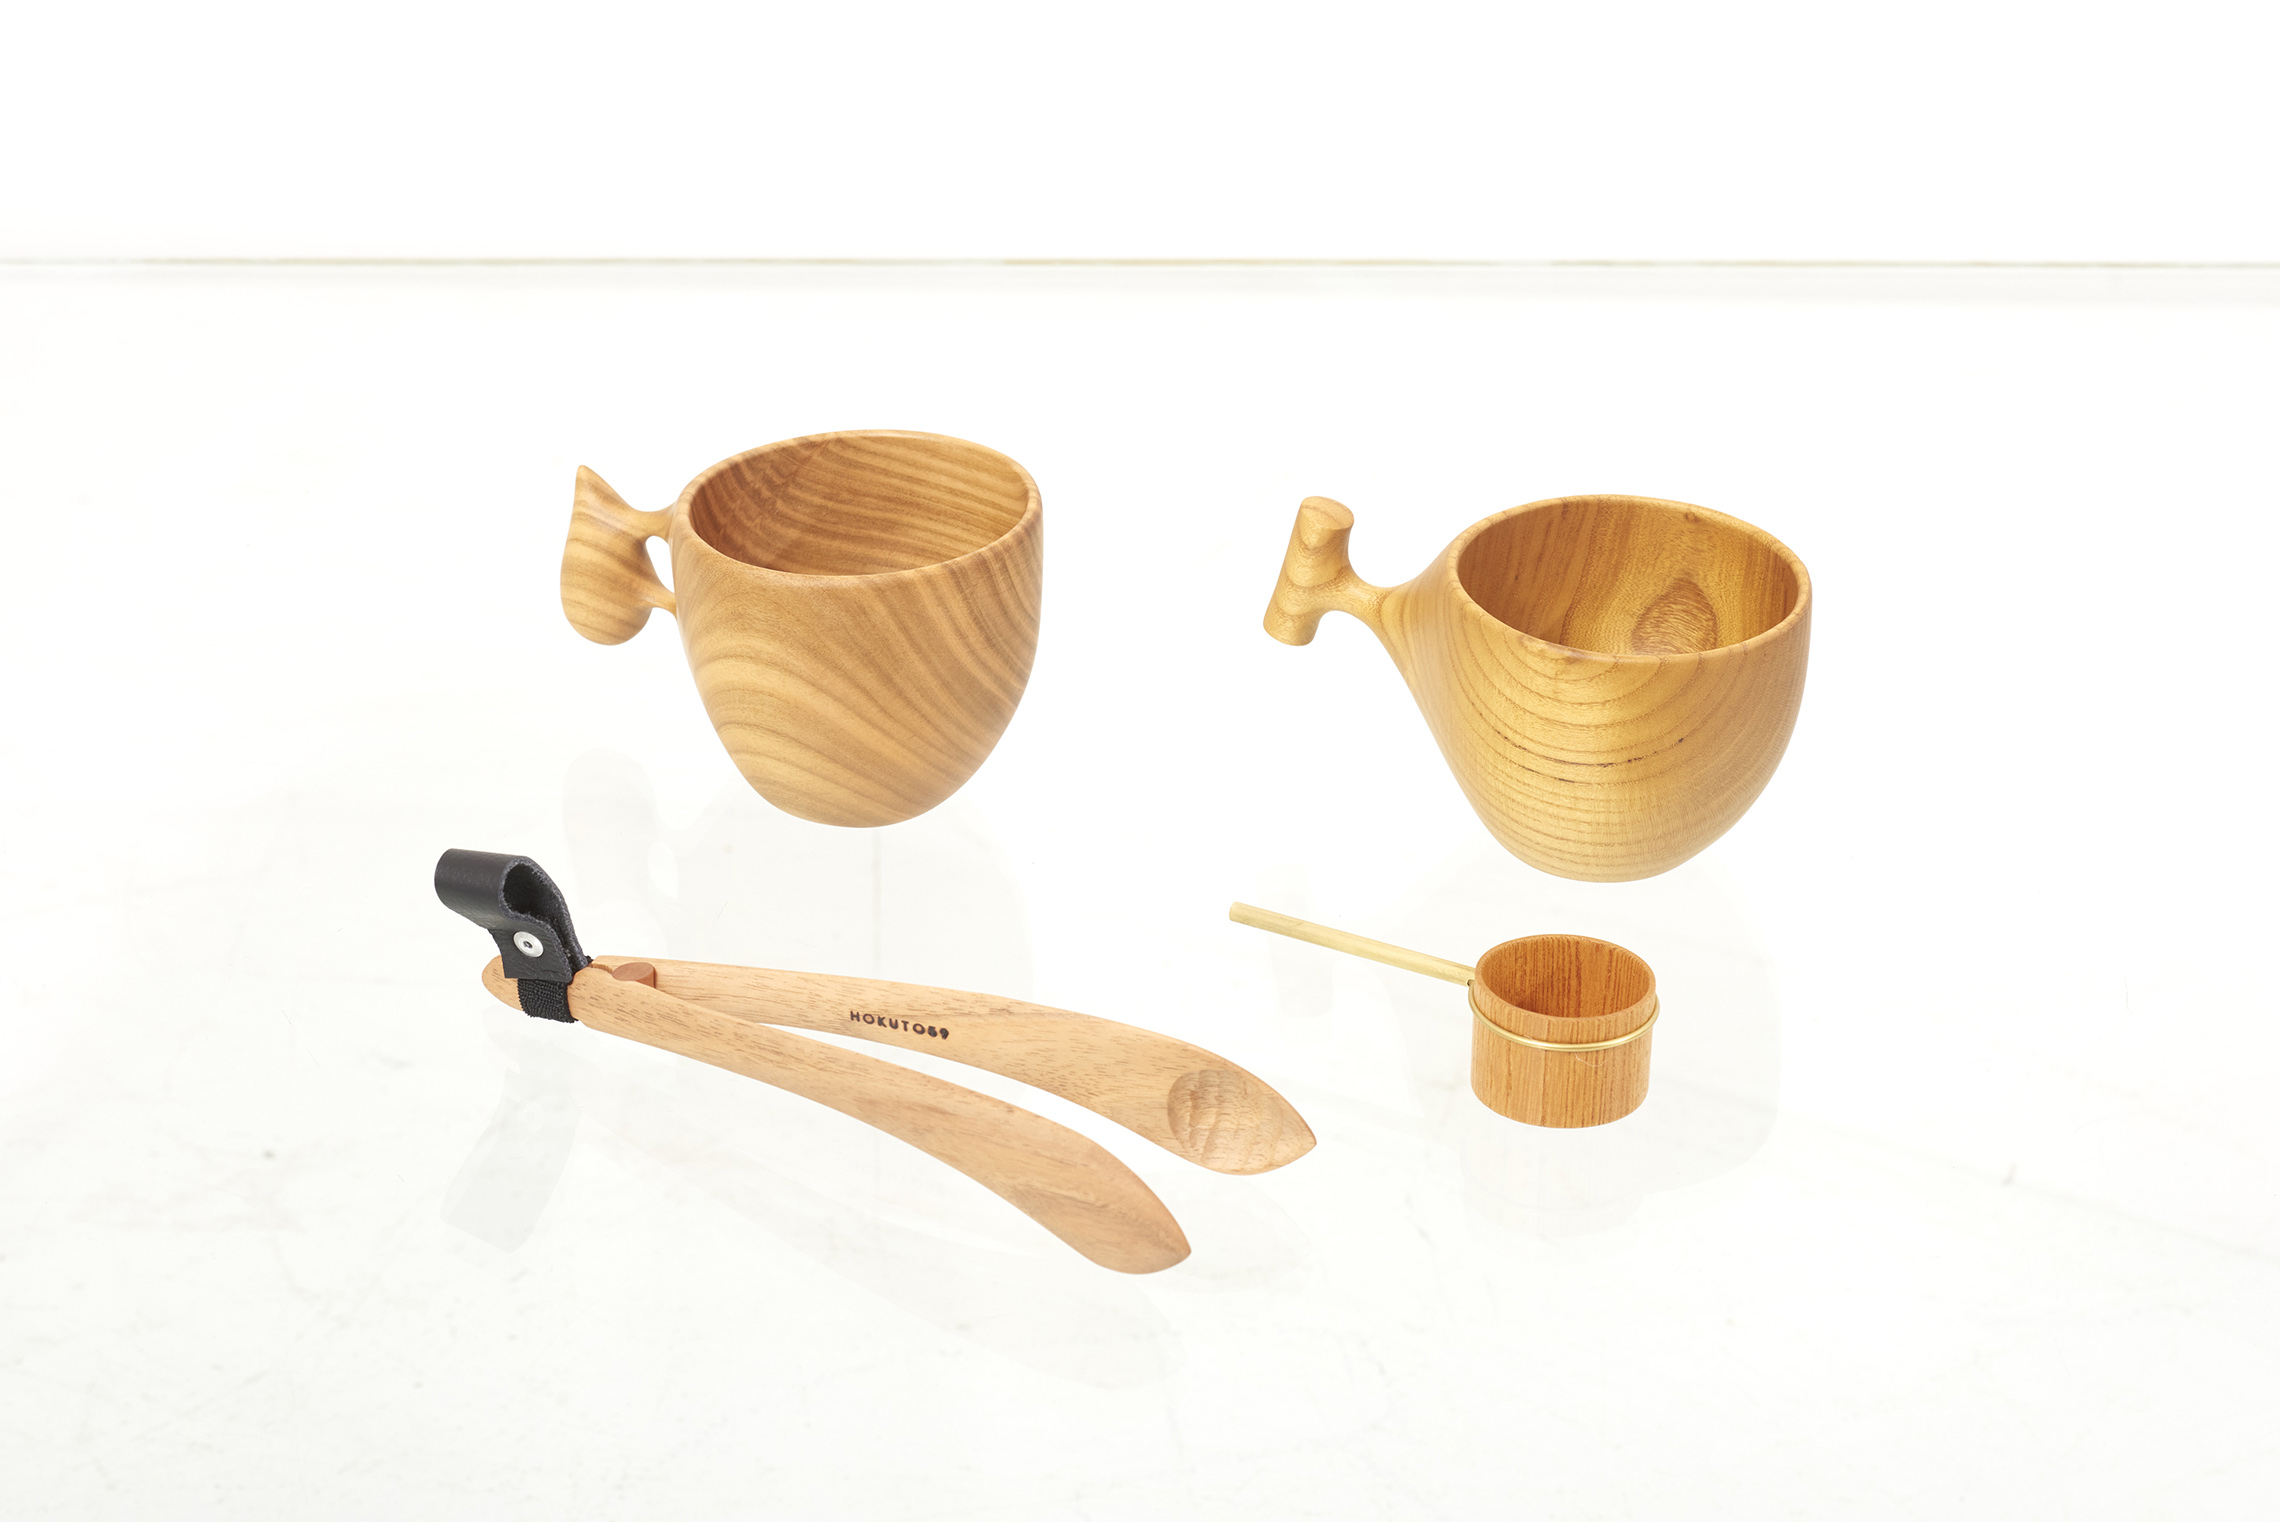 hand-crafted japanese furniture and wooden tableware